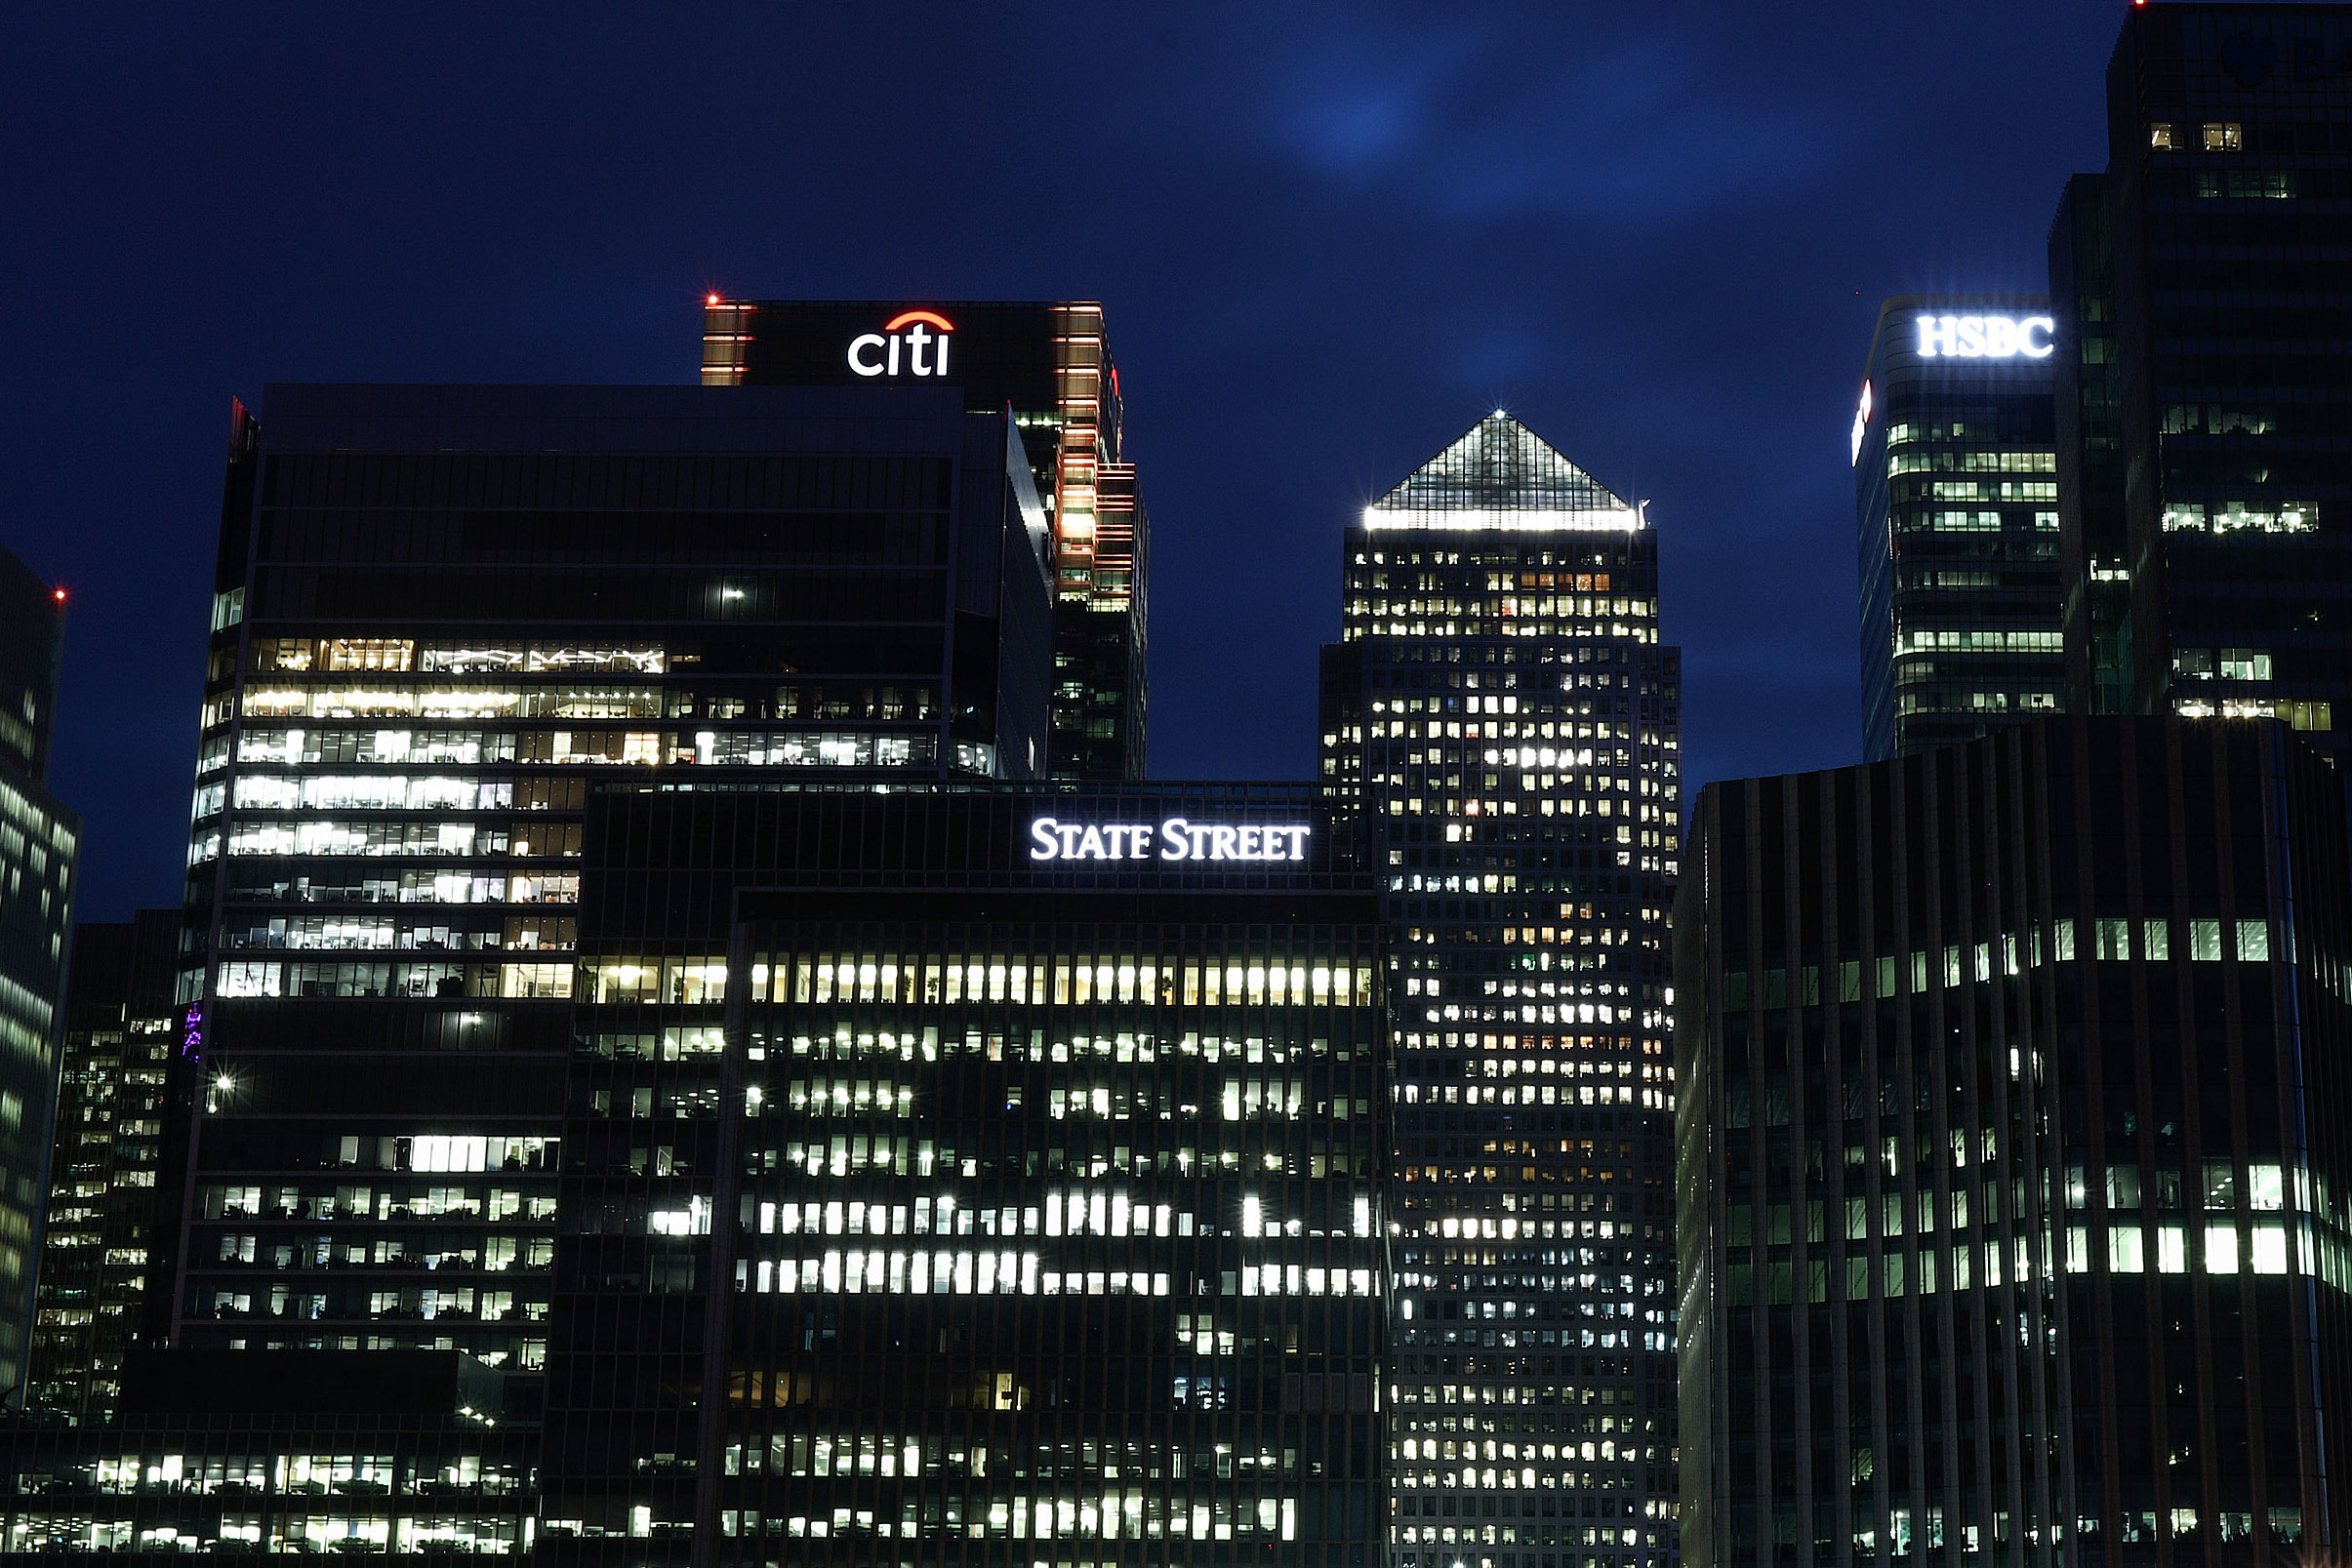 Citigroup Said to Offer London Canary Wharf Space After Job Cuts - Bloomberg